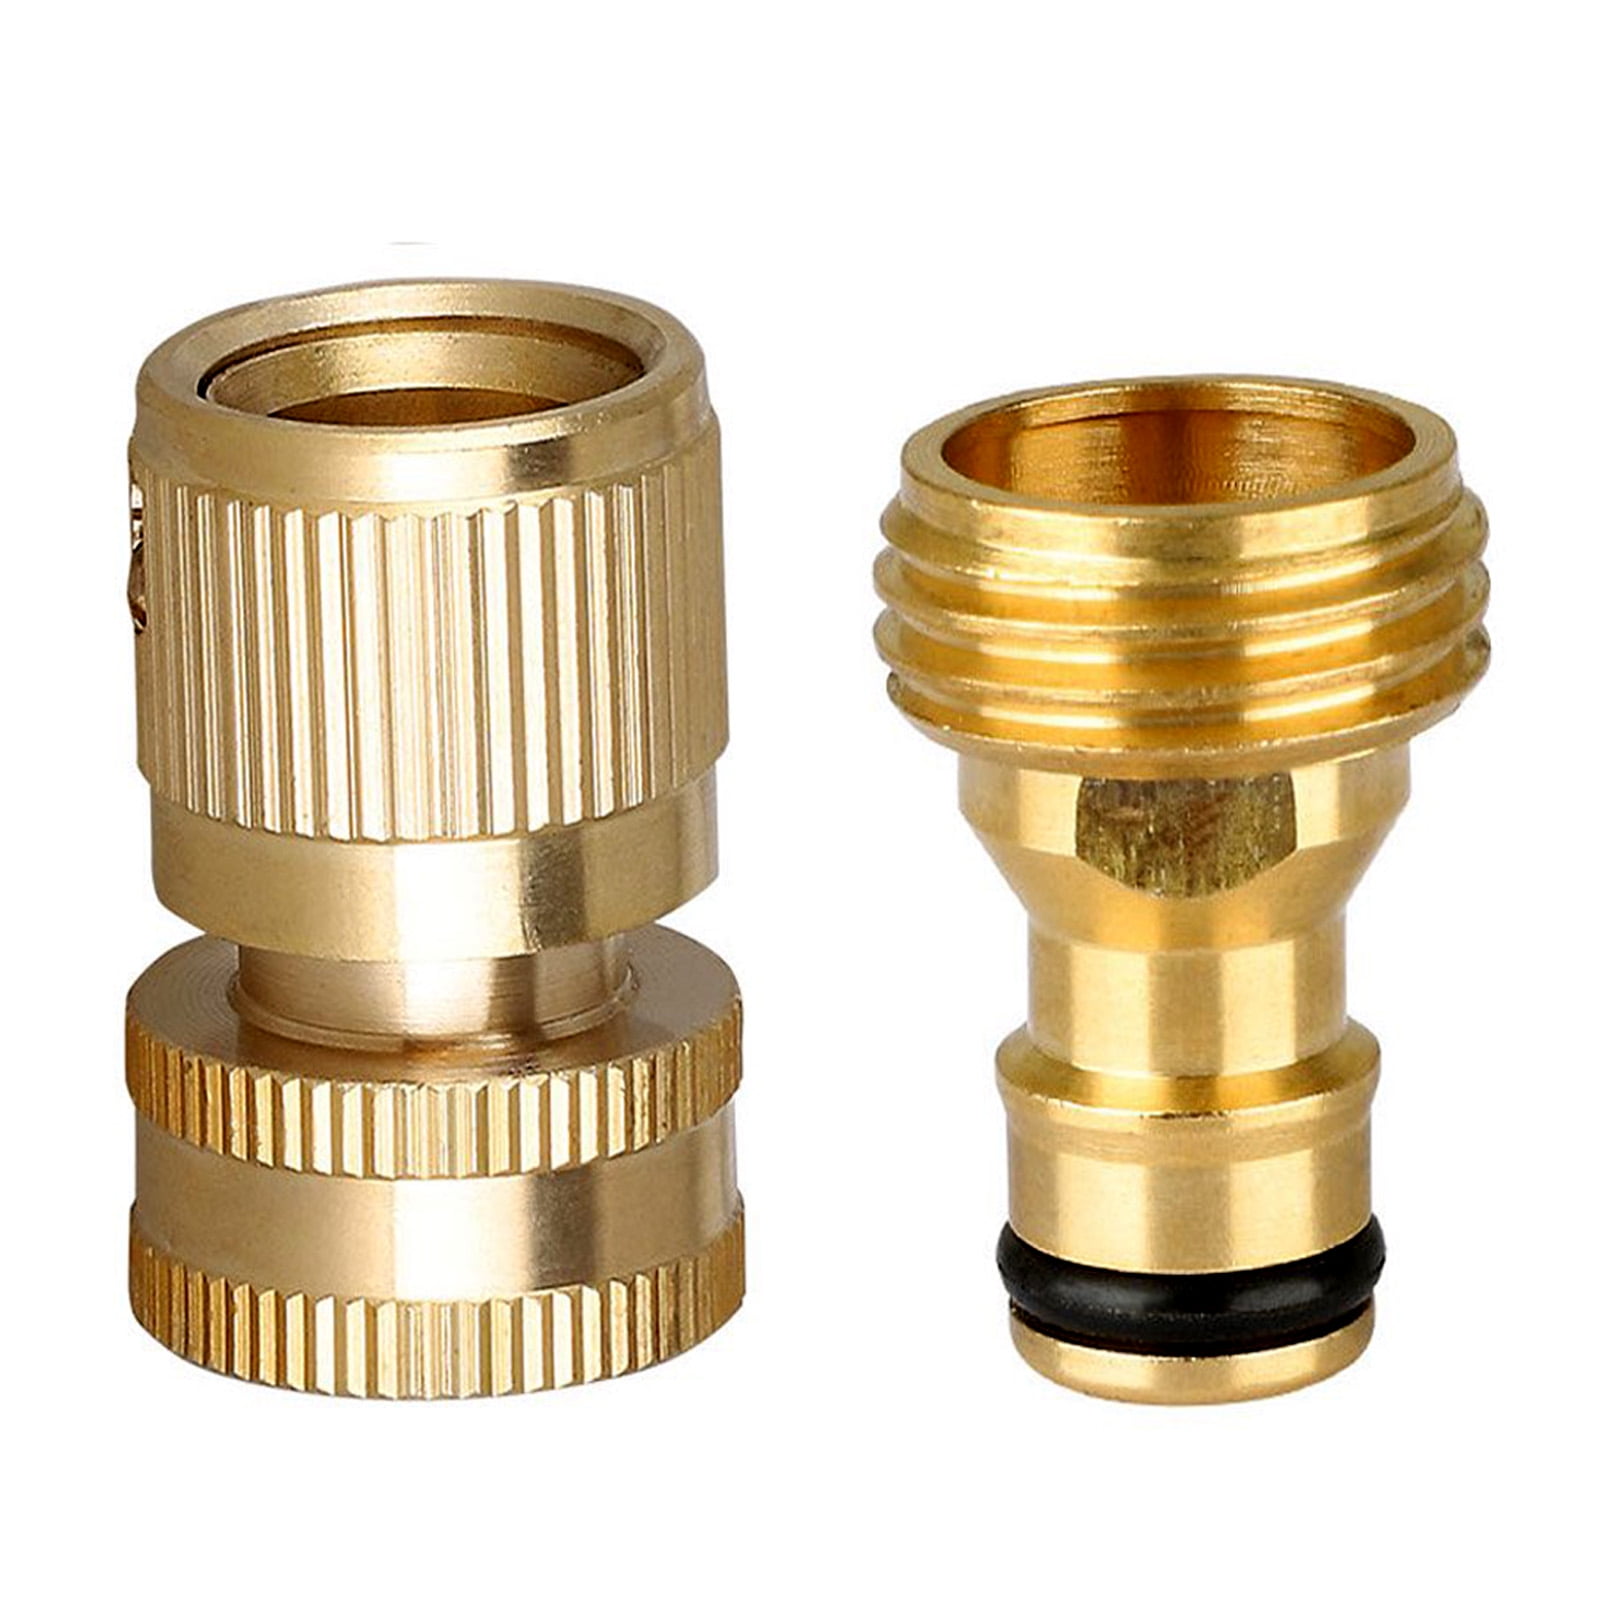 Details about   Brass Female Garden Hose Adapter Connector,For Water Hose Pipes Quick Connection 